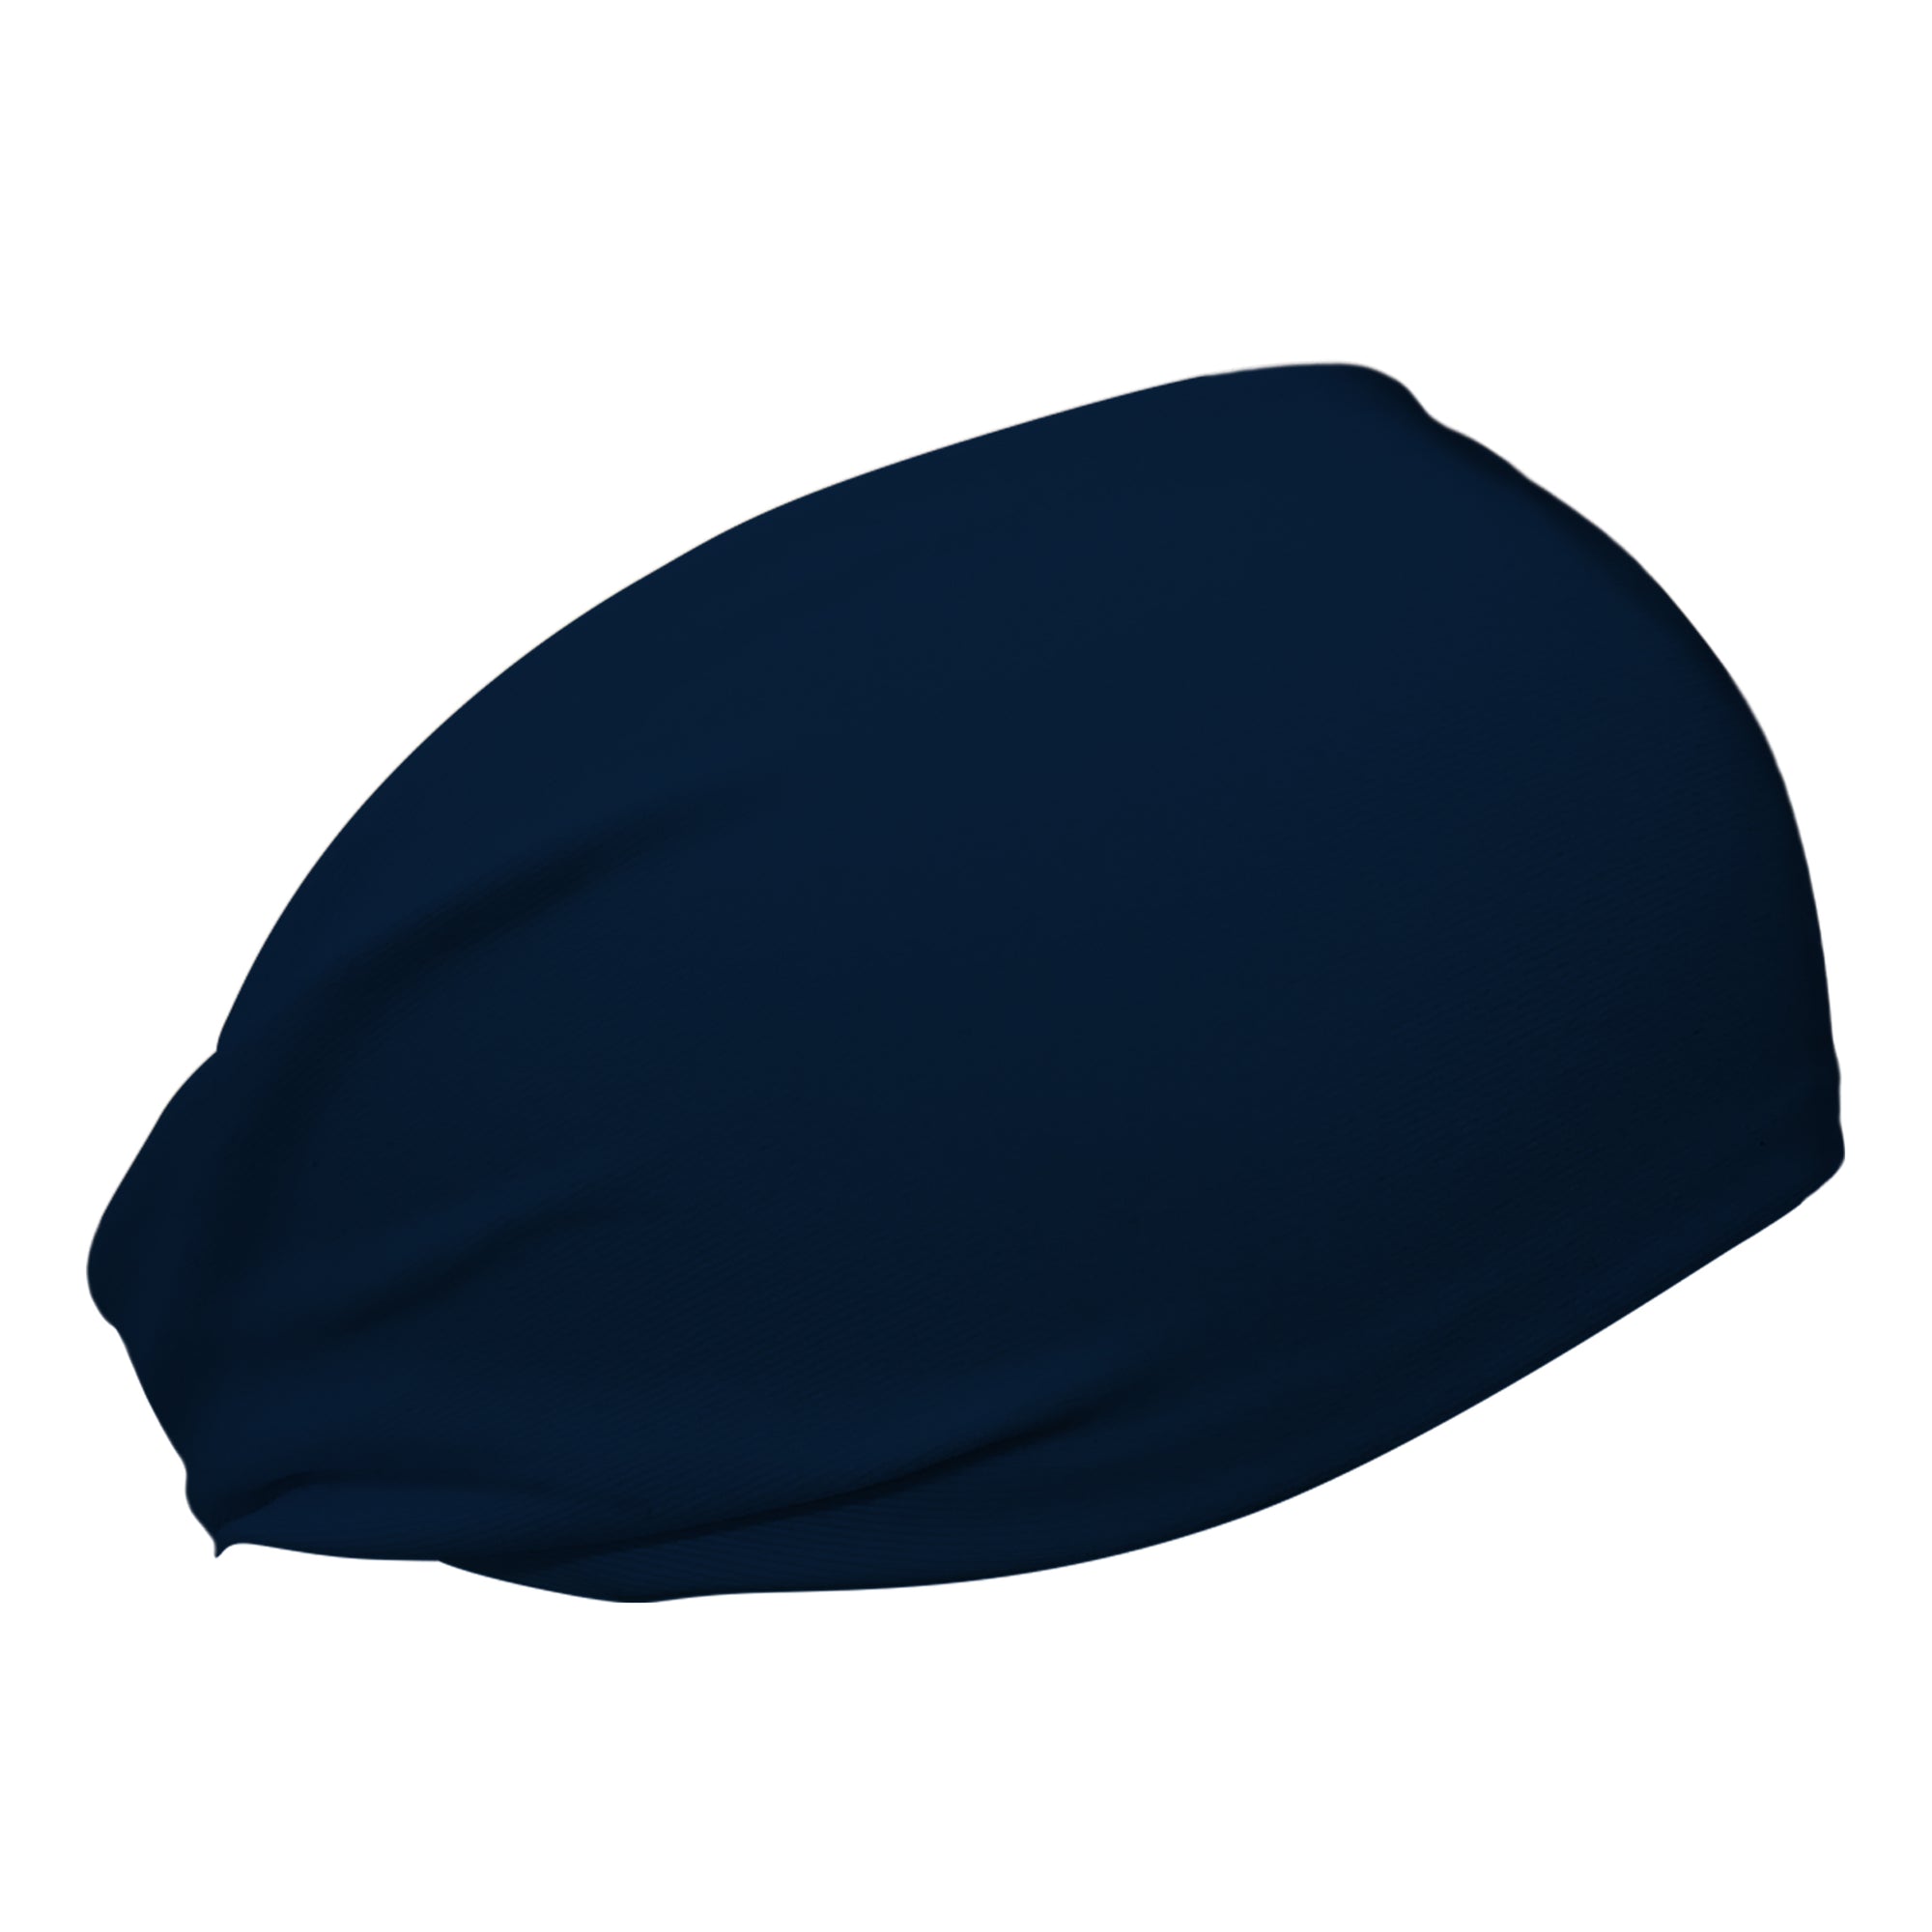 Navy blue cooling headband for men and women. Made in USA cooling headband by Bani Bands.